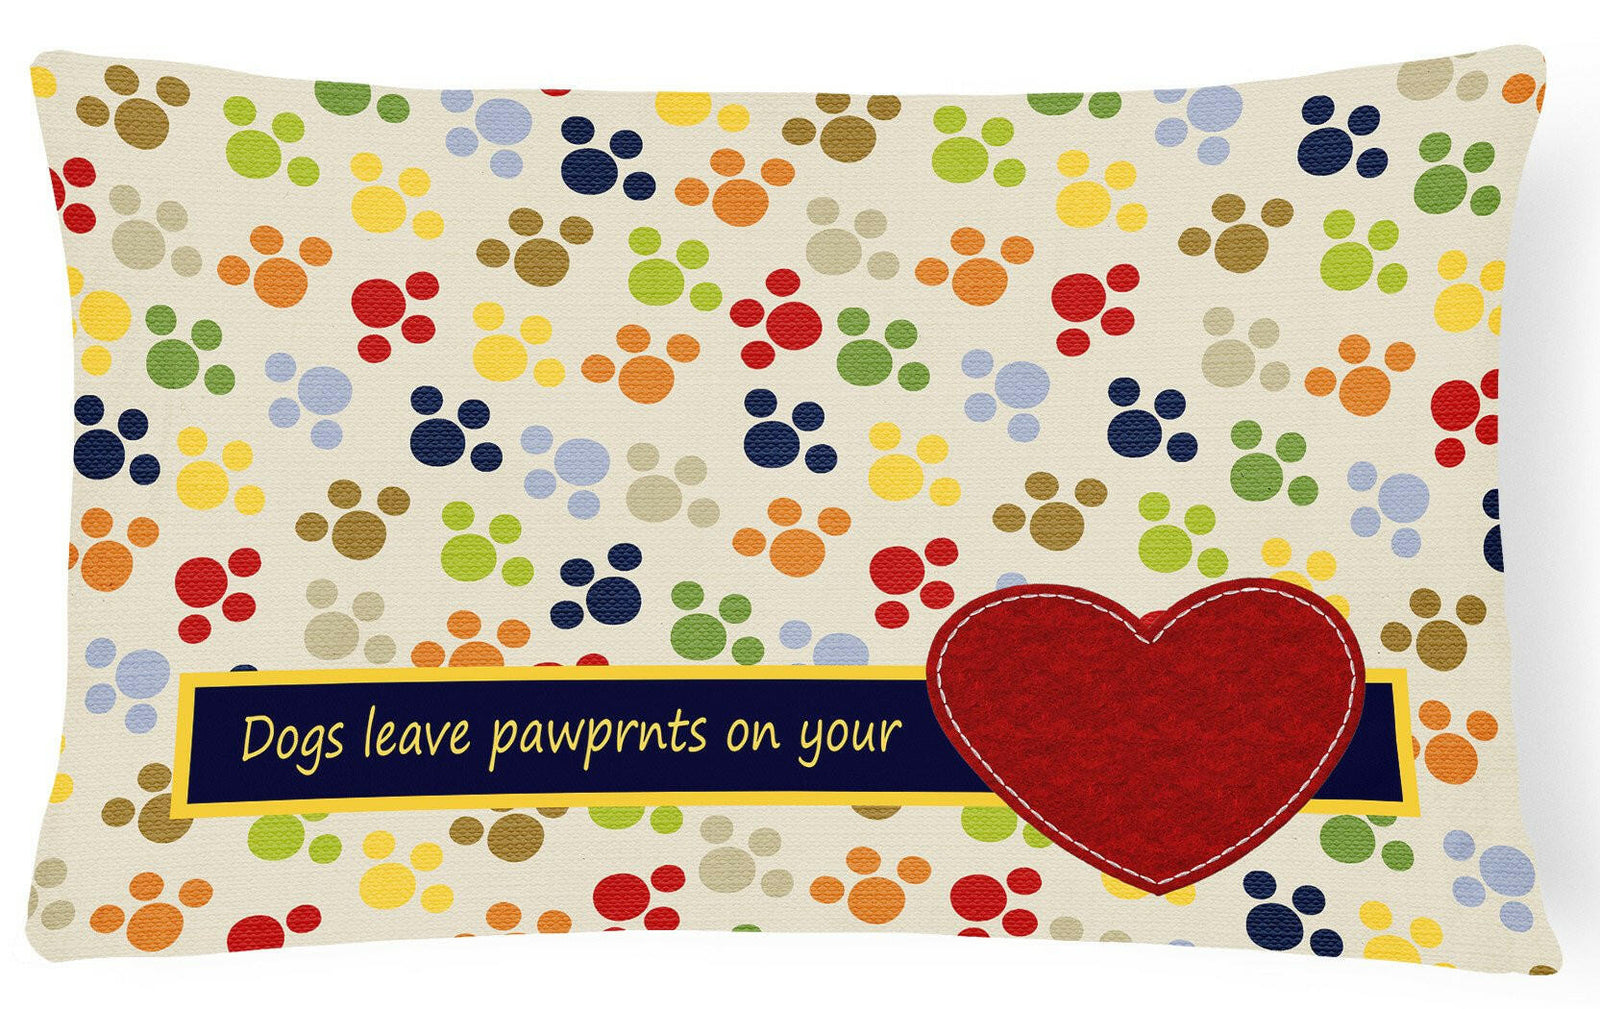 Dogs leave pawprints on your heart   Canvas Fabric Decorative Pillow SB3054PW1216 by Caroline's Treasures